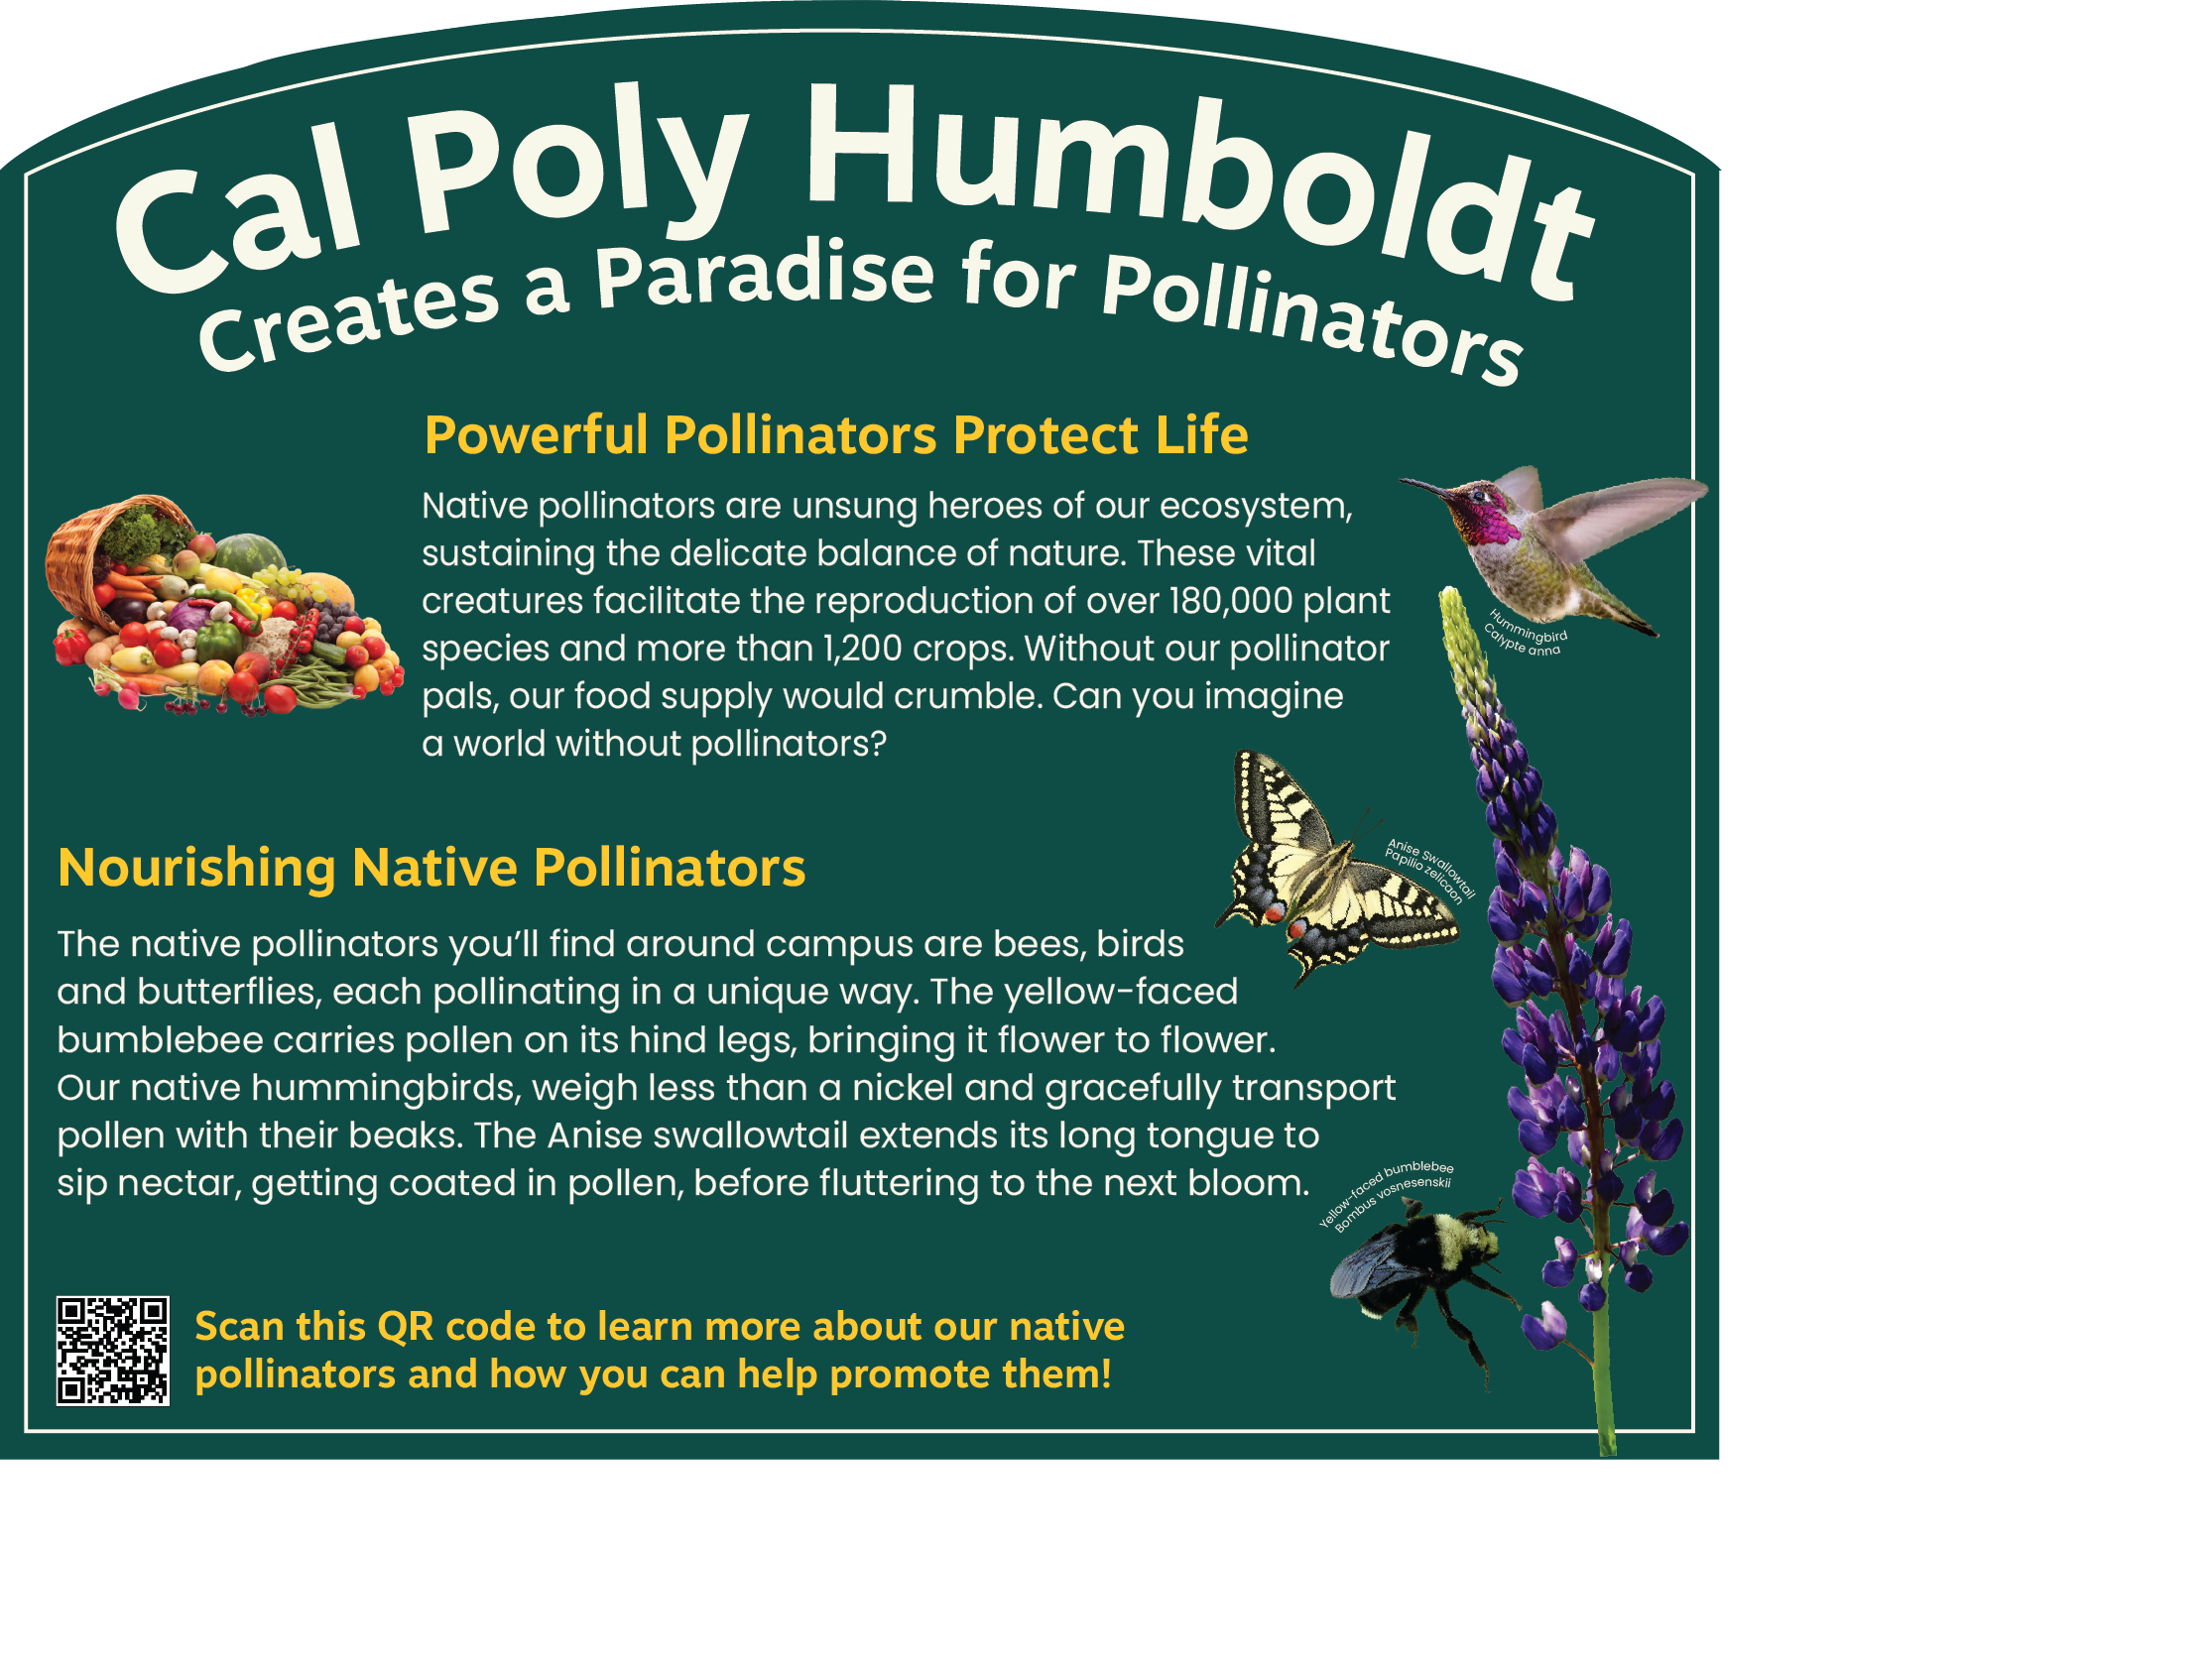 Image of the sign, "Cal Poly Humboldt Creates a Paradise for Pollinators"